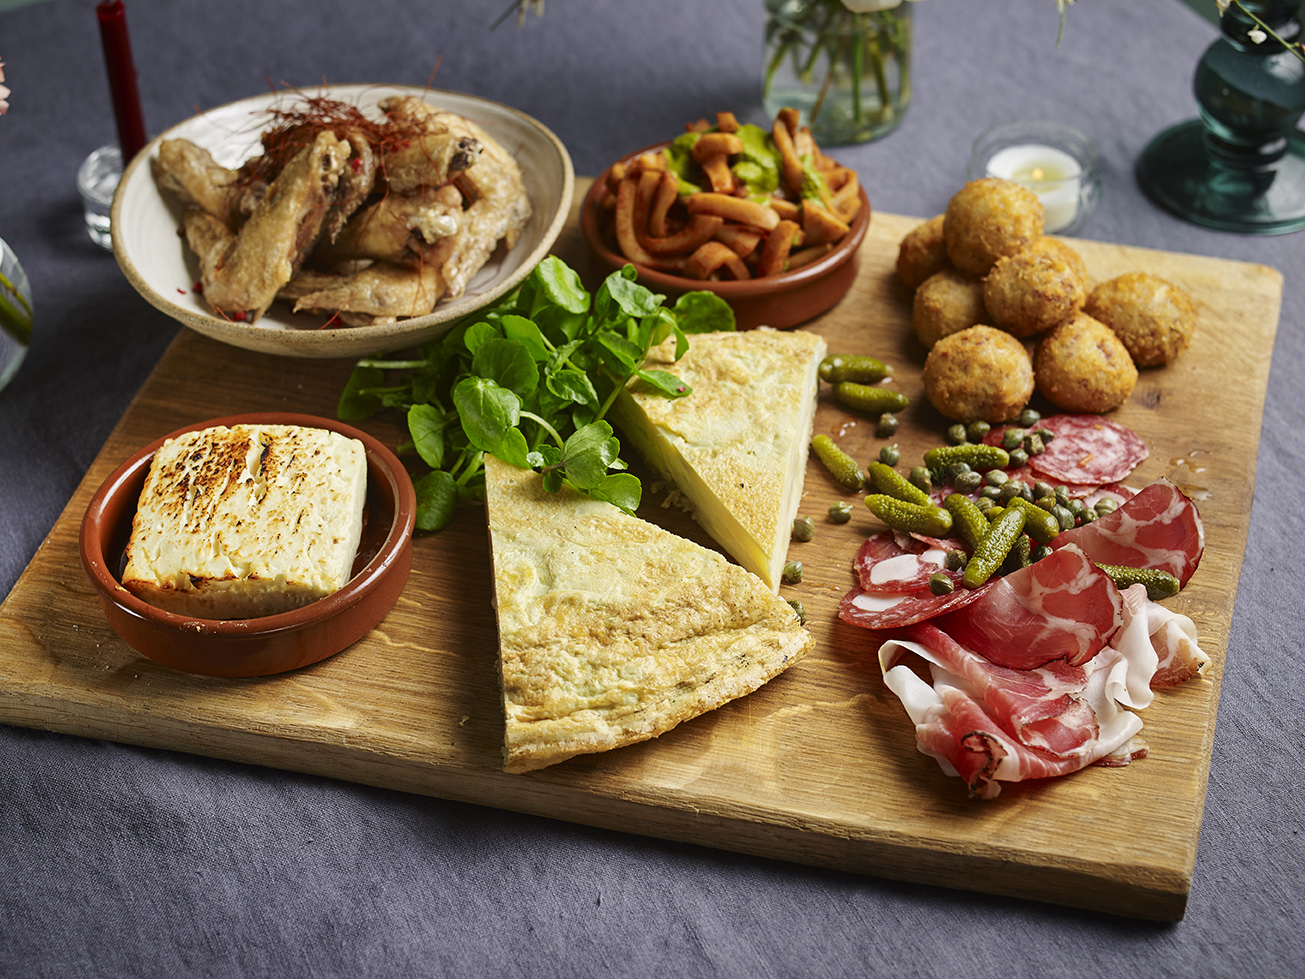 Image of a sharing platters wedding catering served on a wooden board